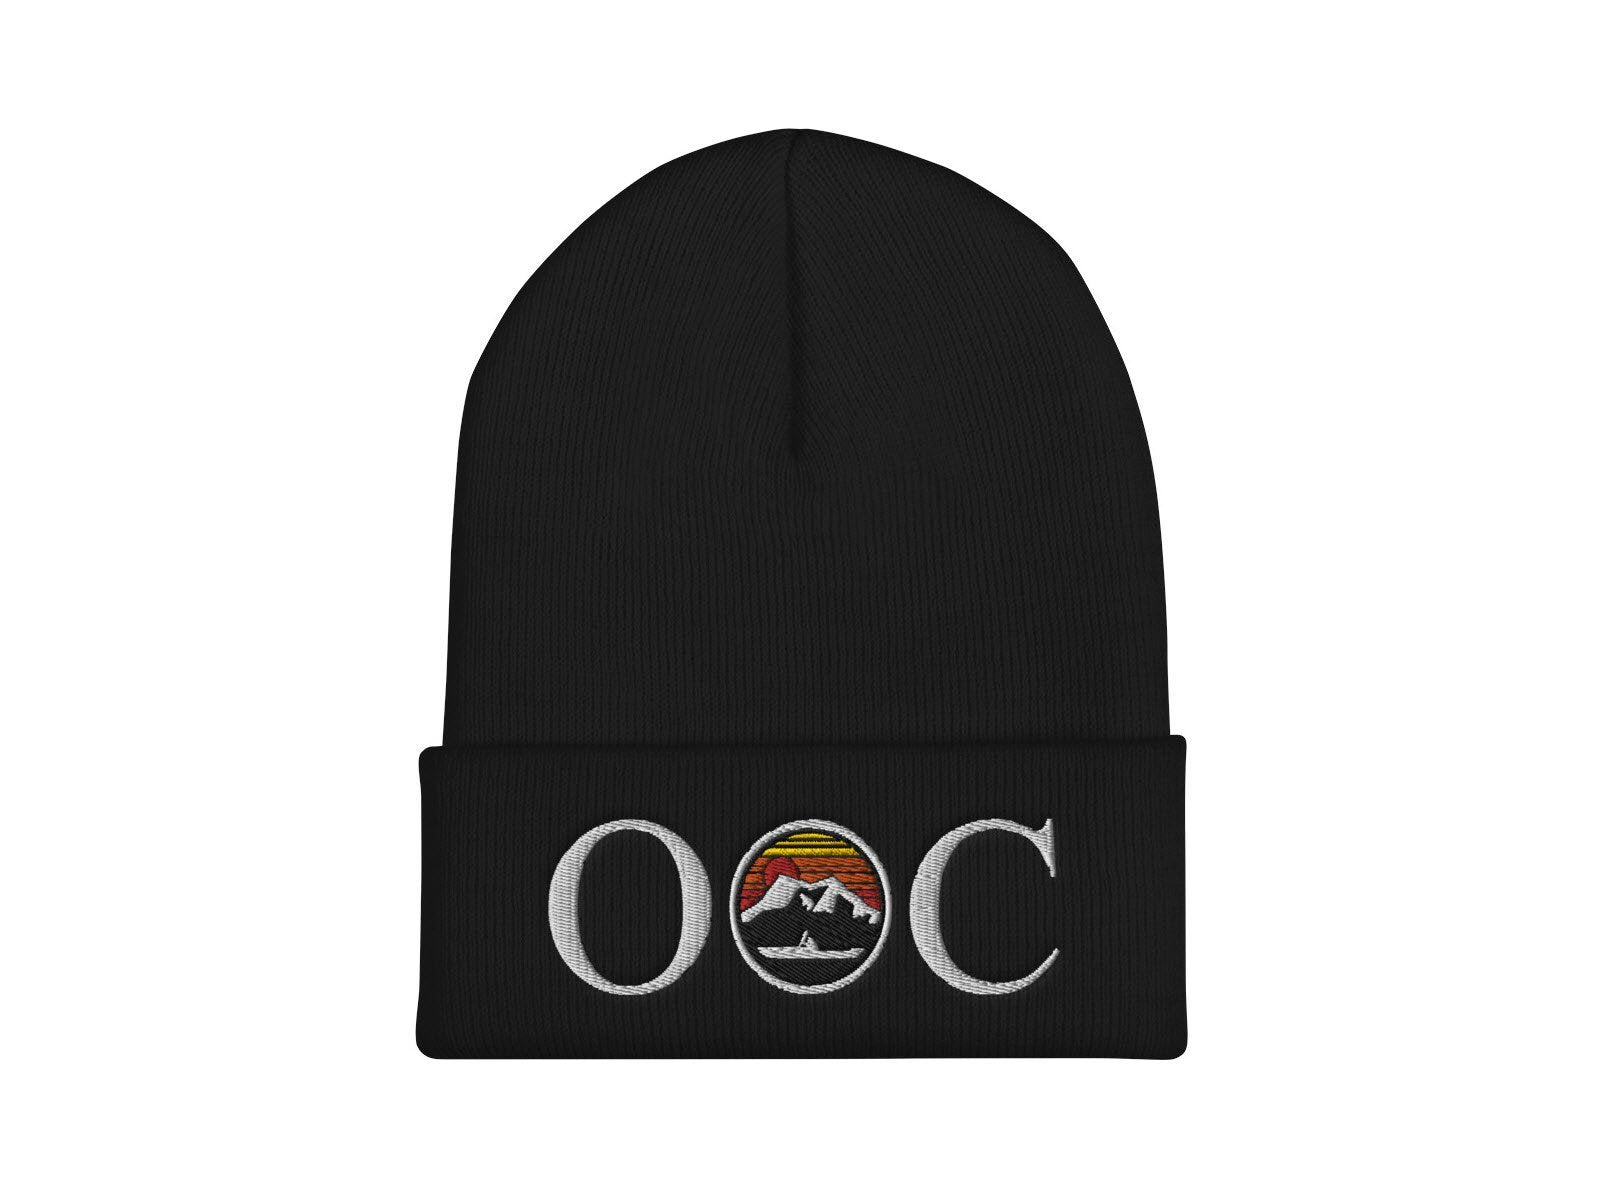 Olympic Outdoor Center OOC Logo Cuffed Beanie in Black